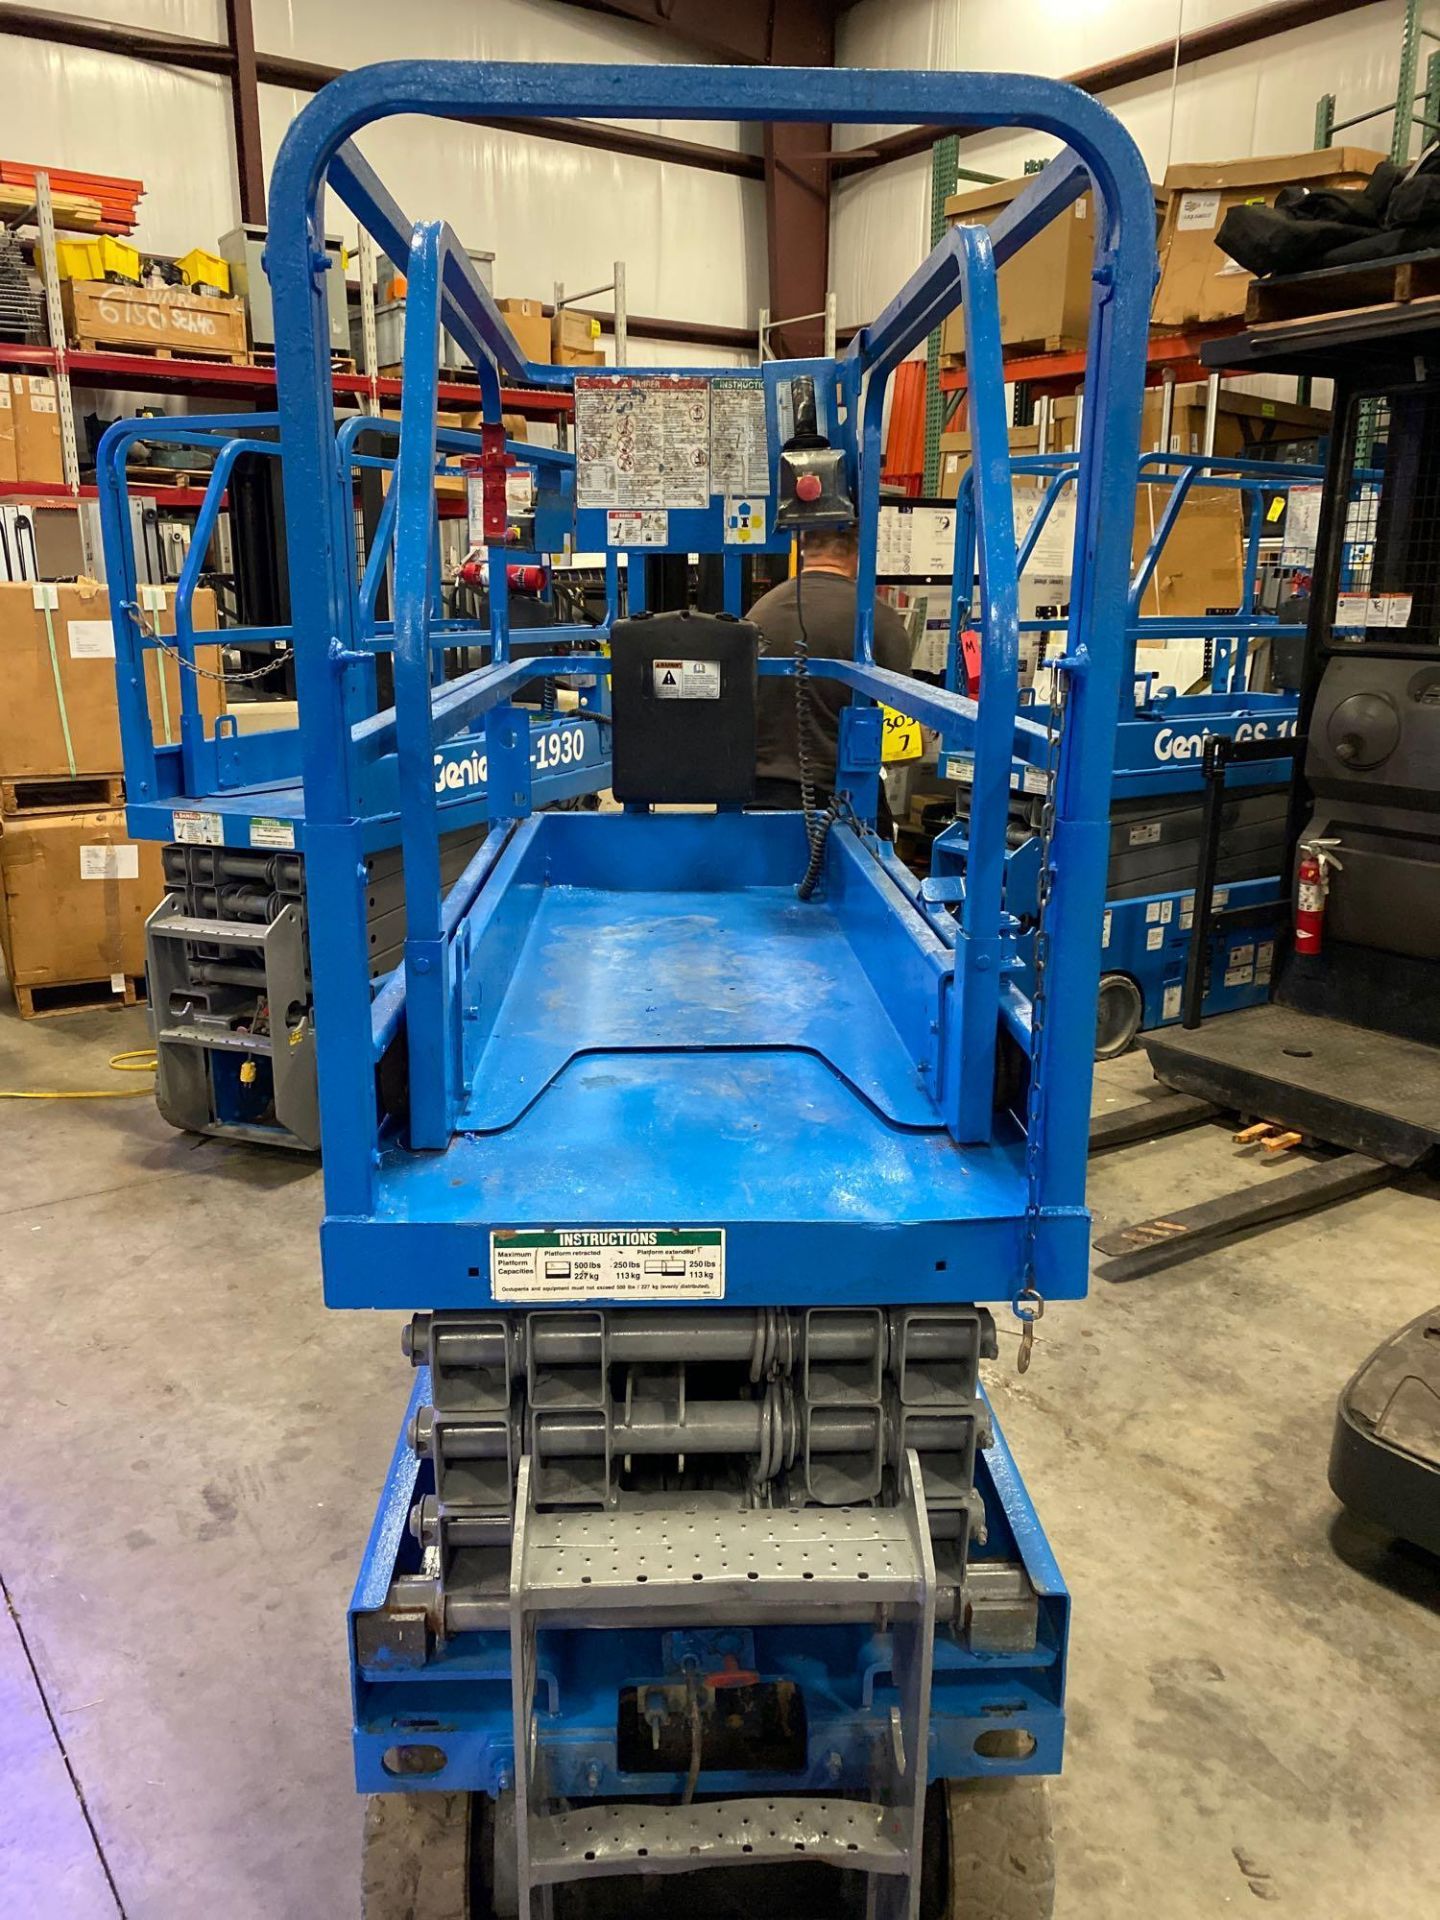 GENIE GS-1930 ELECTRIC SCISSOR LIFT, SELF PROPELLED, 19' PLATFORM HEIGHT, BUILT IN BATTERY CHARGER, - Image 3 of 4